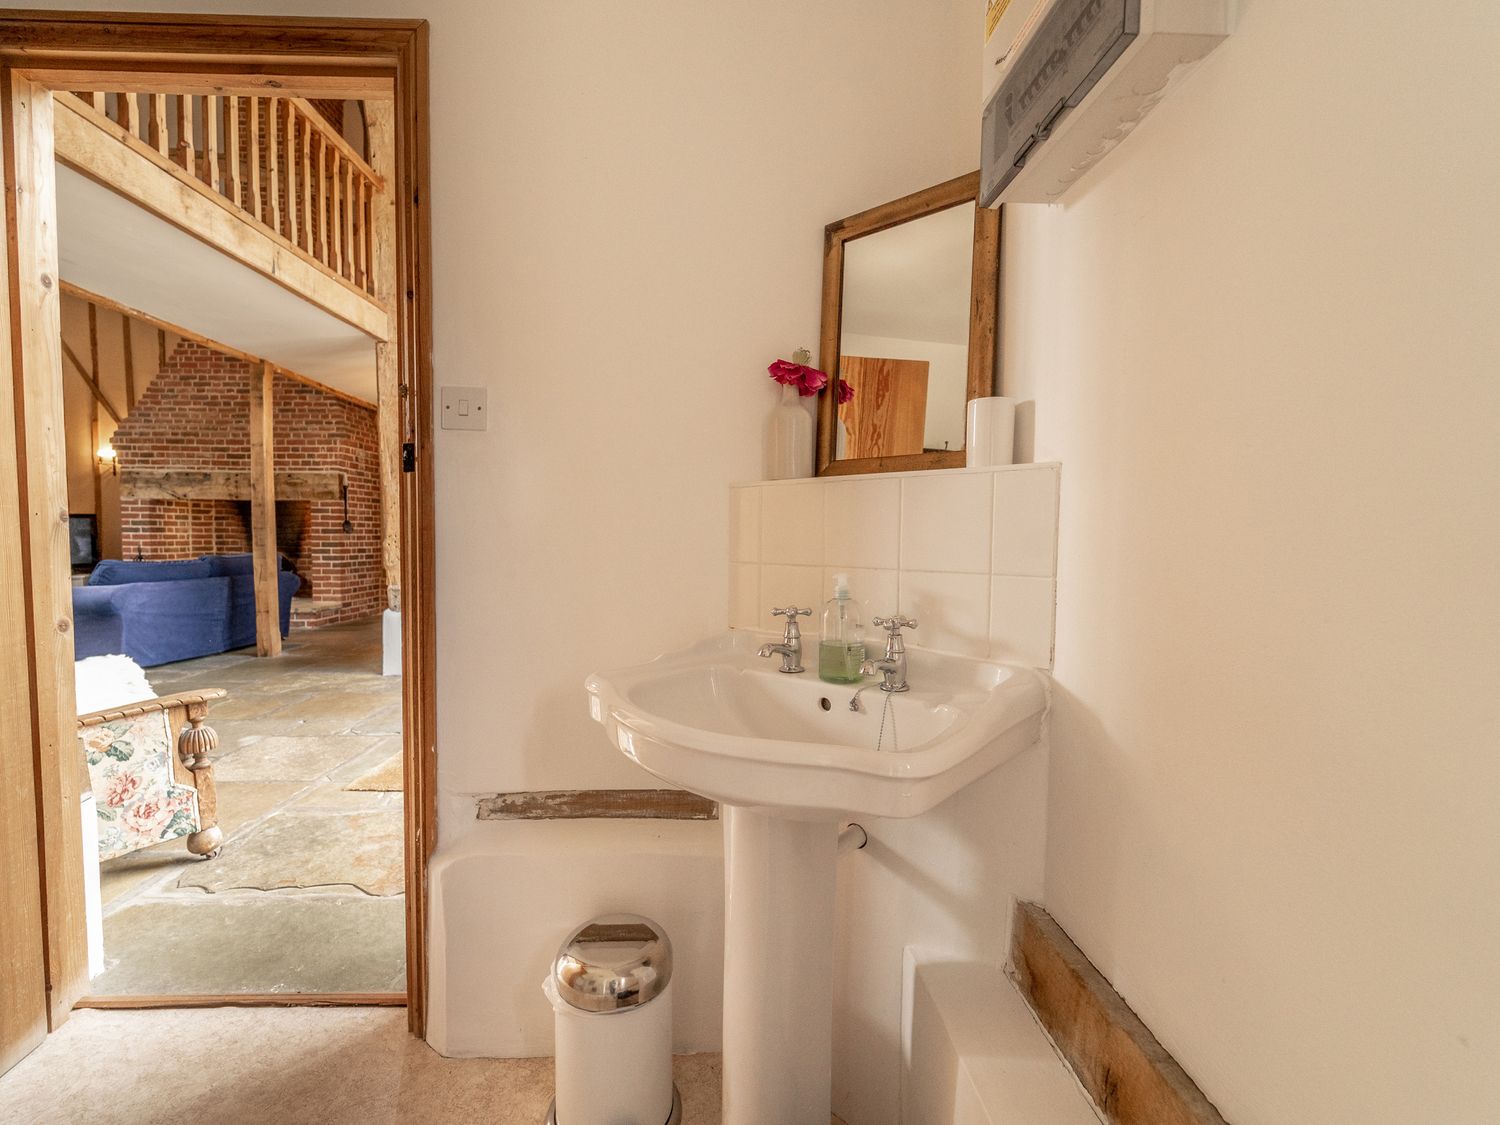 Manor Farm Barn is a glorious, 17th-century barn conversion in Thorndon, Suffolk. Hot tub. Character